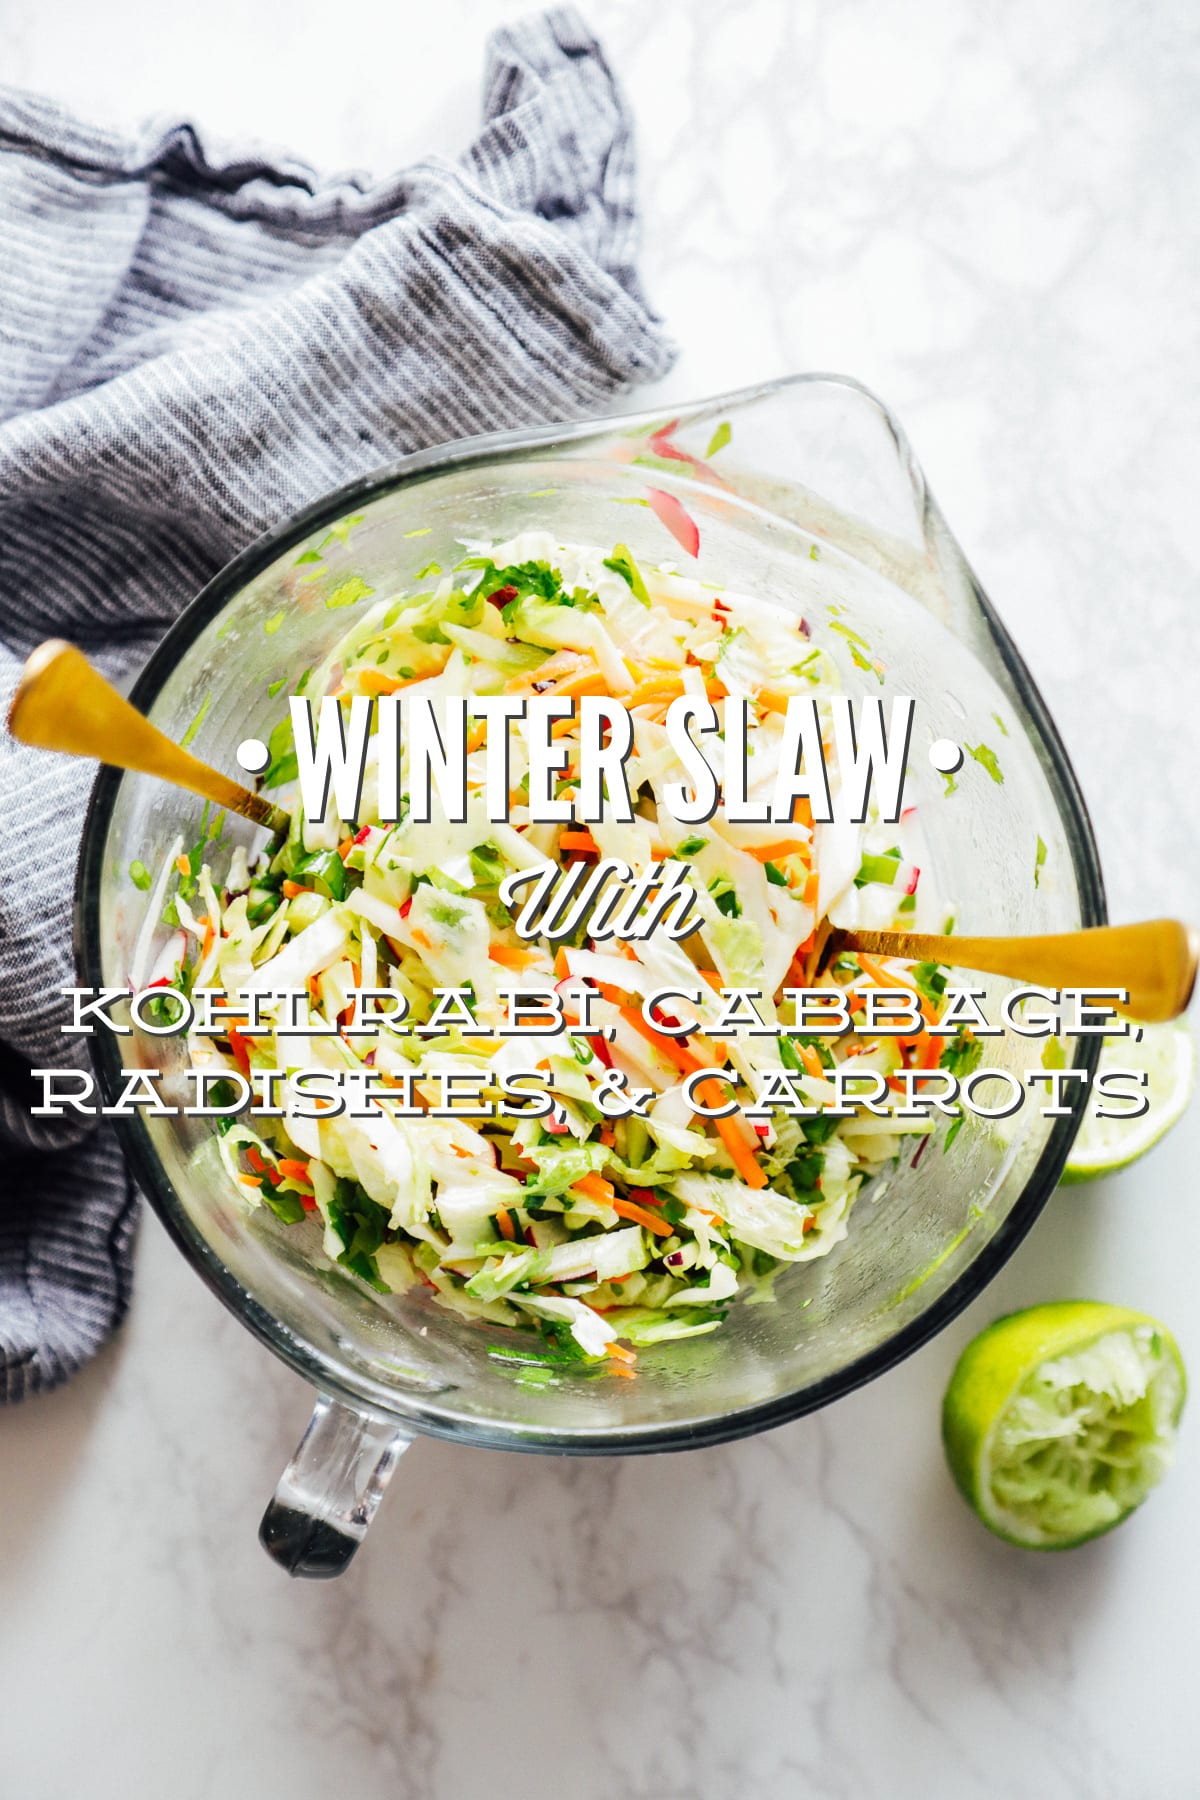 Winter Slaw with Kohlrabi, Cabbage, Radishes, and Carrots (For Tacos, Sandwiches, or a side salad)